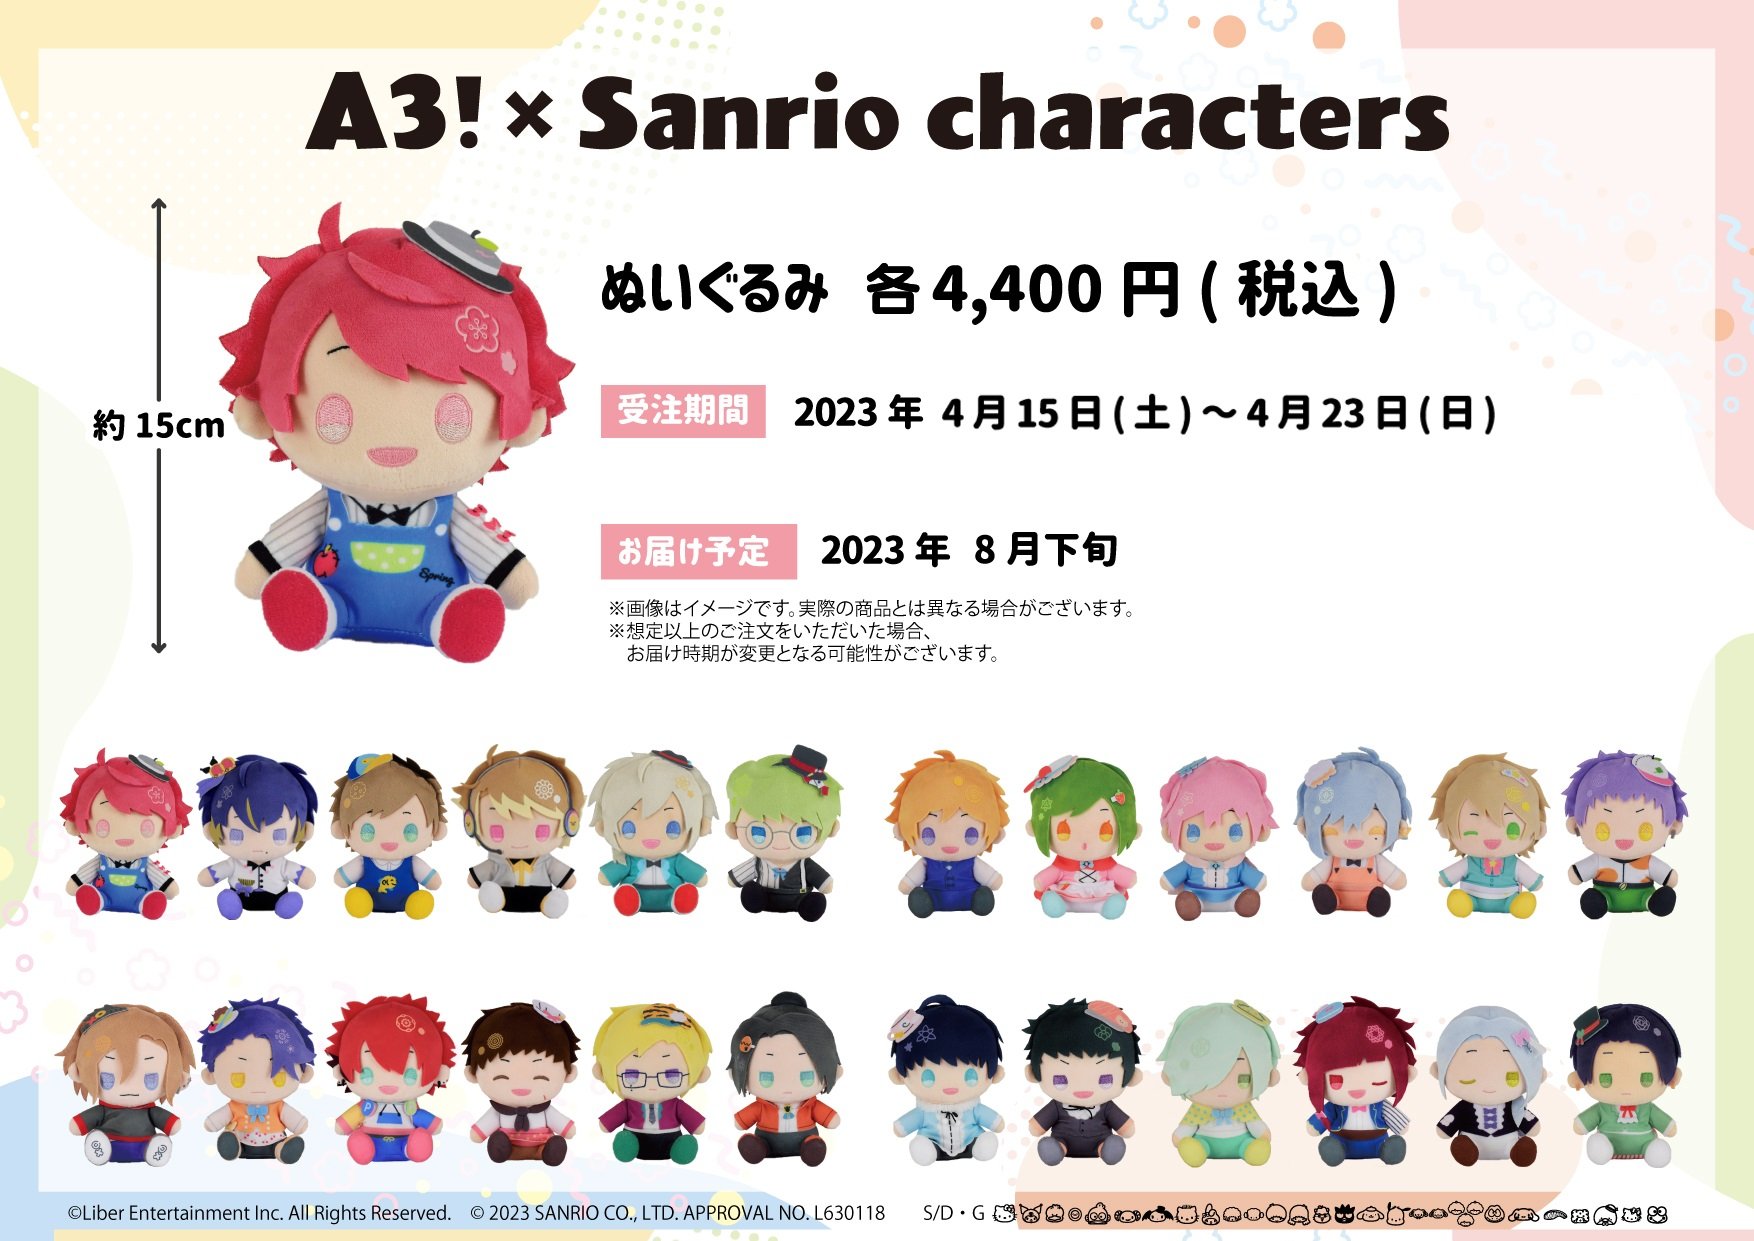 A3!×Sanrio characters on X: 